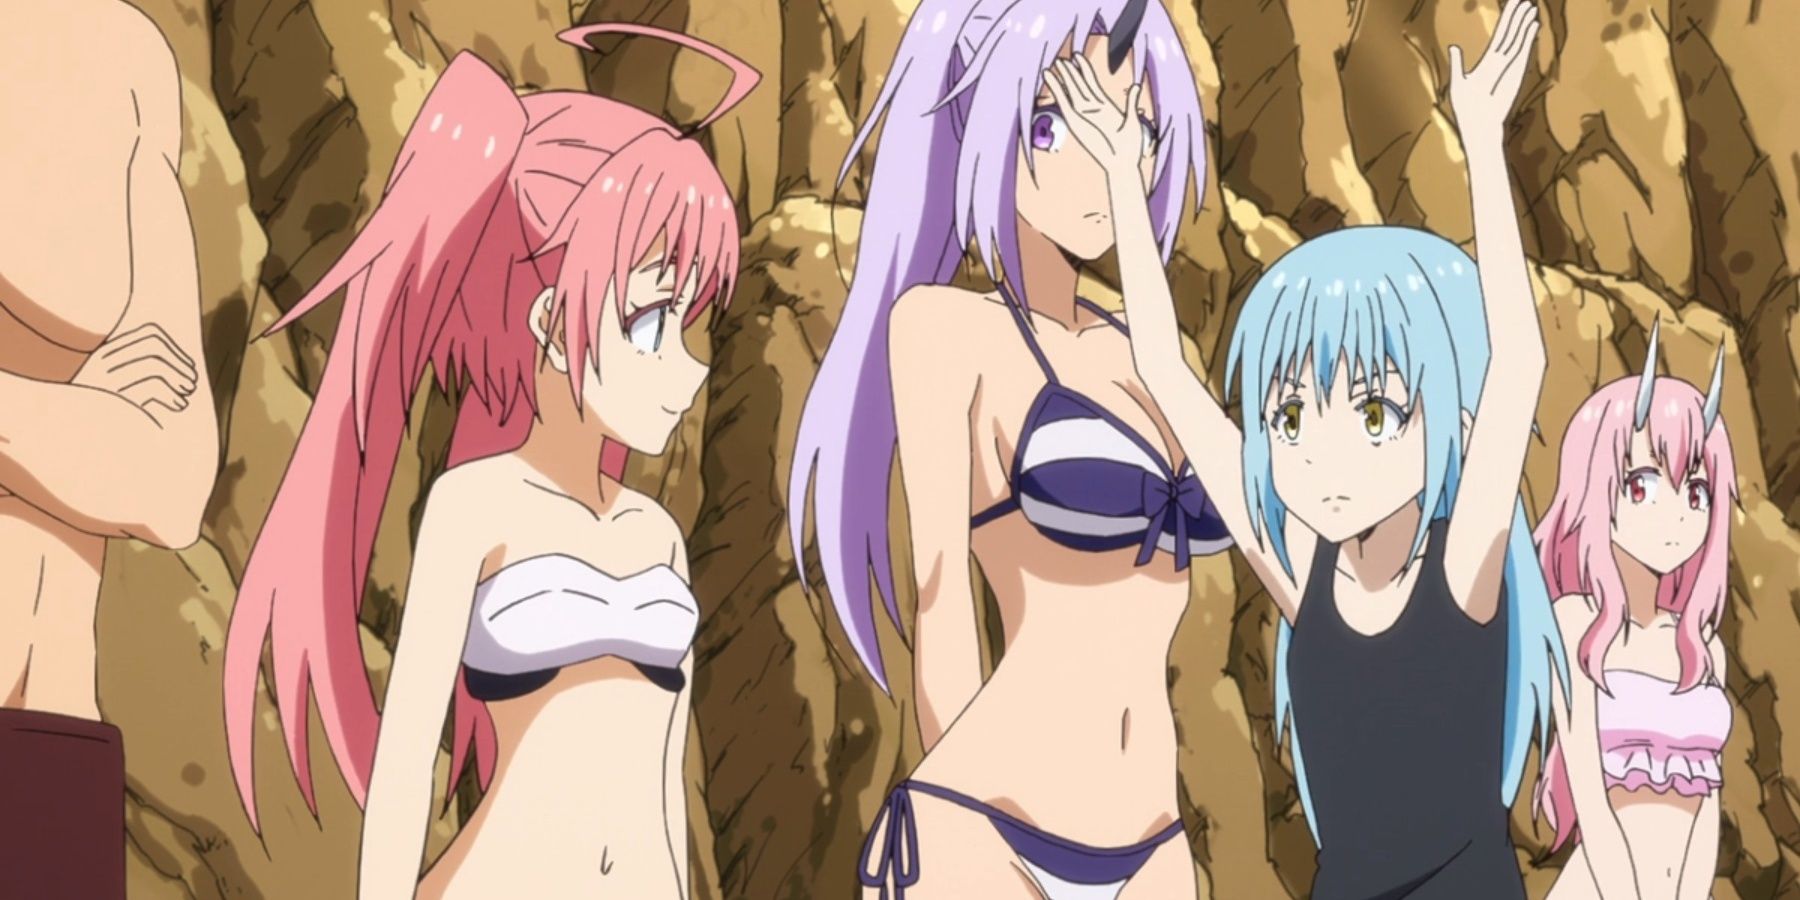 Rimuru at the beach in That Time I Got Reincarnated As A Slime.